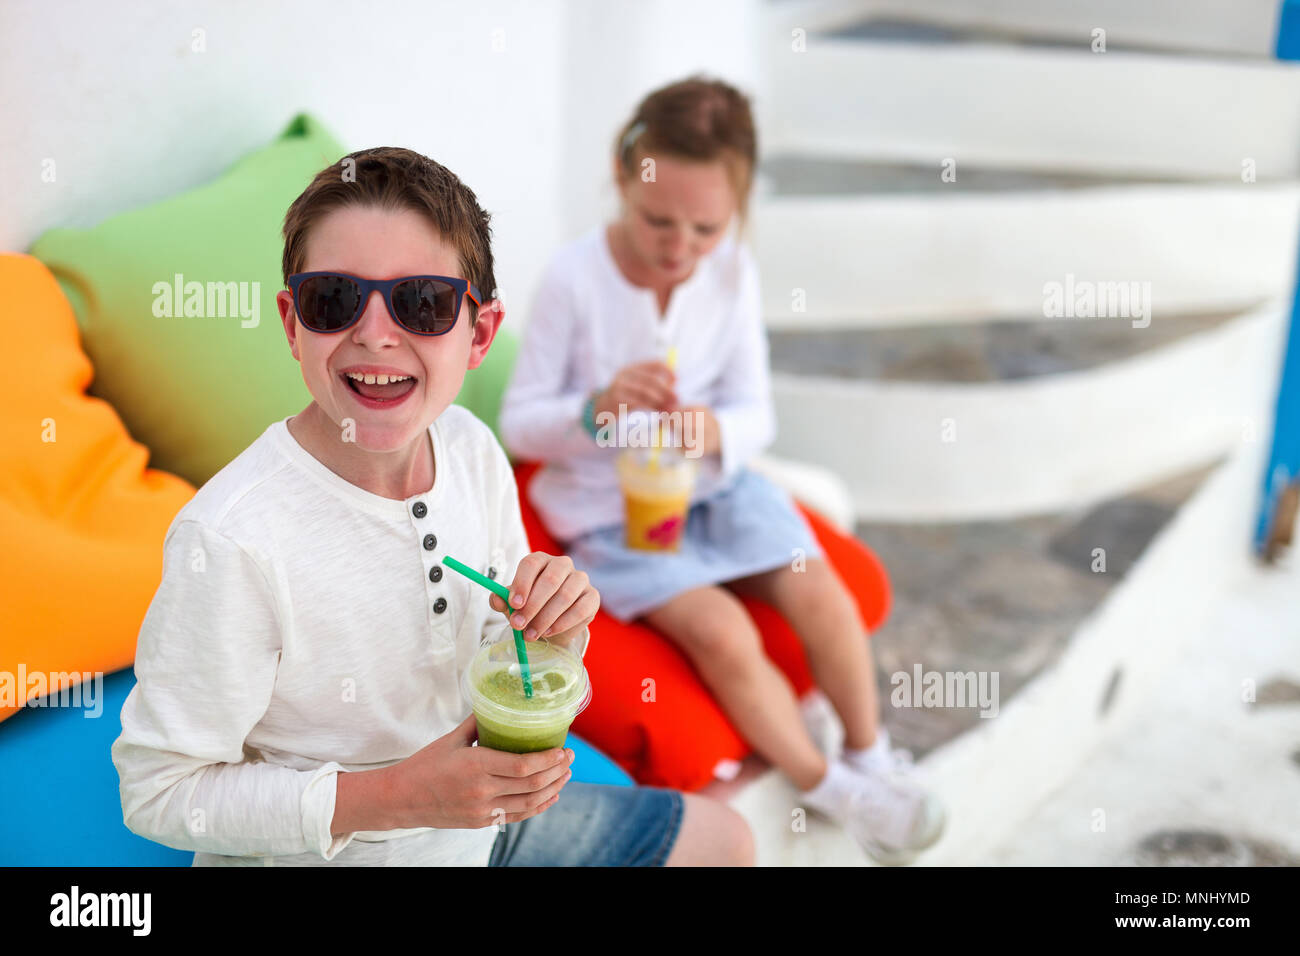 Two cute kids brother and sister drinking fresh smoothies on a colorful pillows at outdoor cafe on summer day Stock Photo